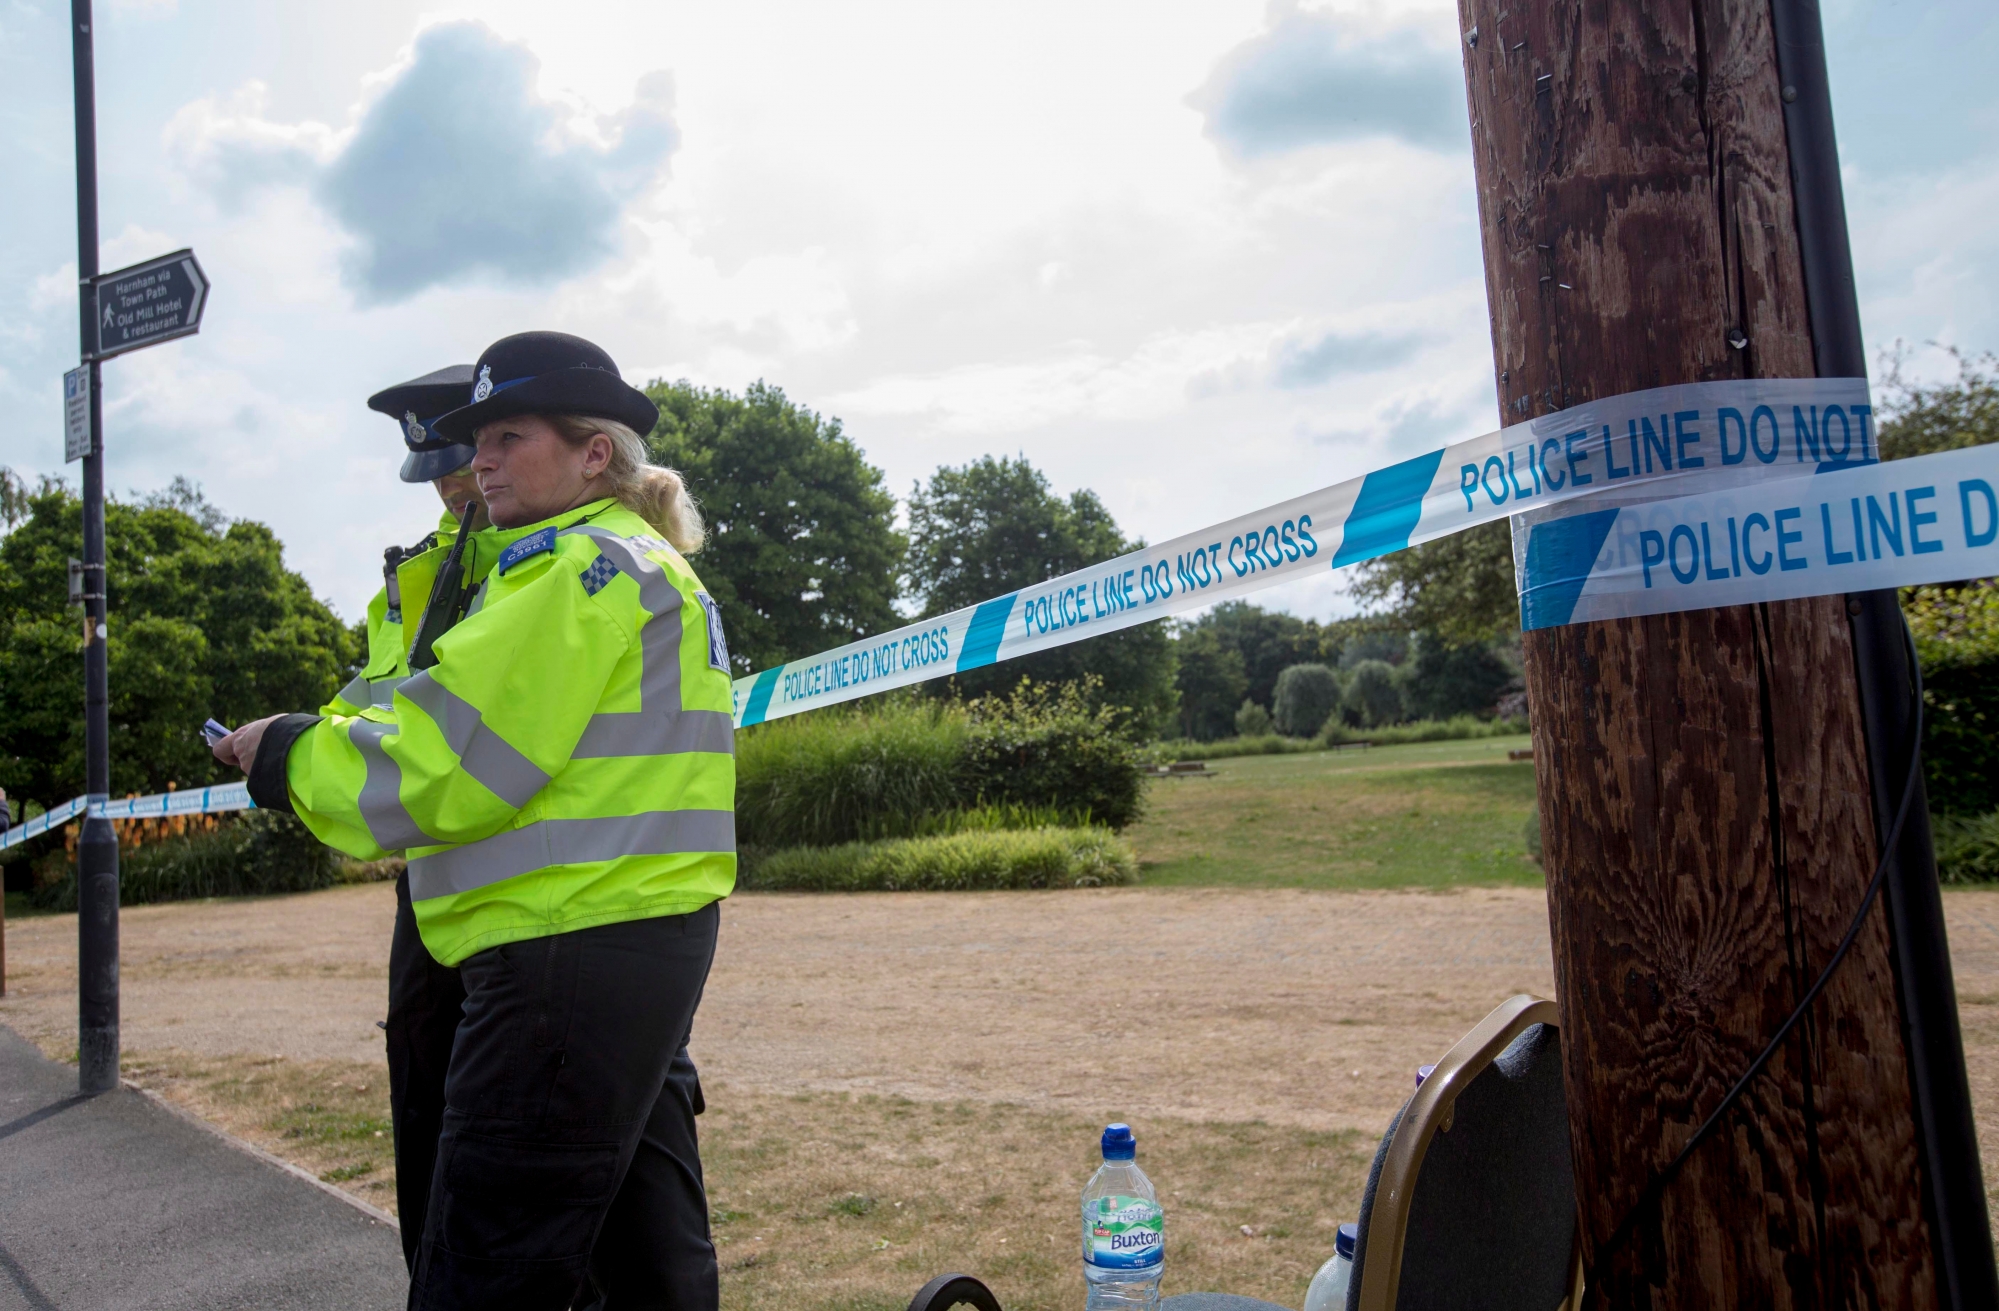 epa06865244 Queen Elizabeth Gardens in Salisbury remains closed and cordoned off as investigations continue into how Dawn S. and Charlie R. were found unconscious on Saturday night, in Amesbury, Britain, 05 July 2018. Charlie R. and his partner Dawn S. had allegedly being exposed to the nerve agent Novichok, according to police.  EPA/RICK FINDLER BRITAIN AMESBURY NERVE AGENT